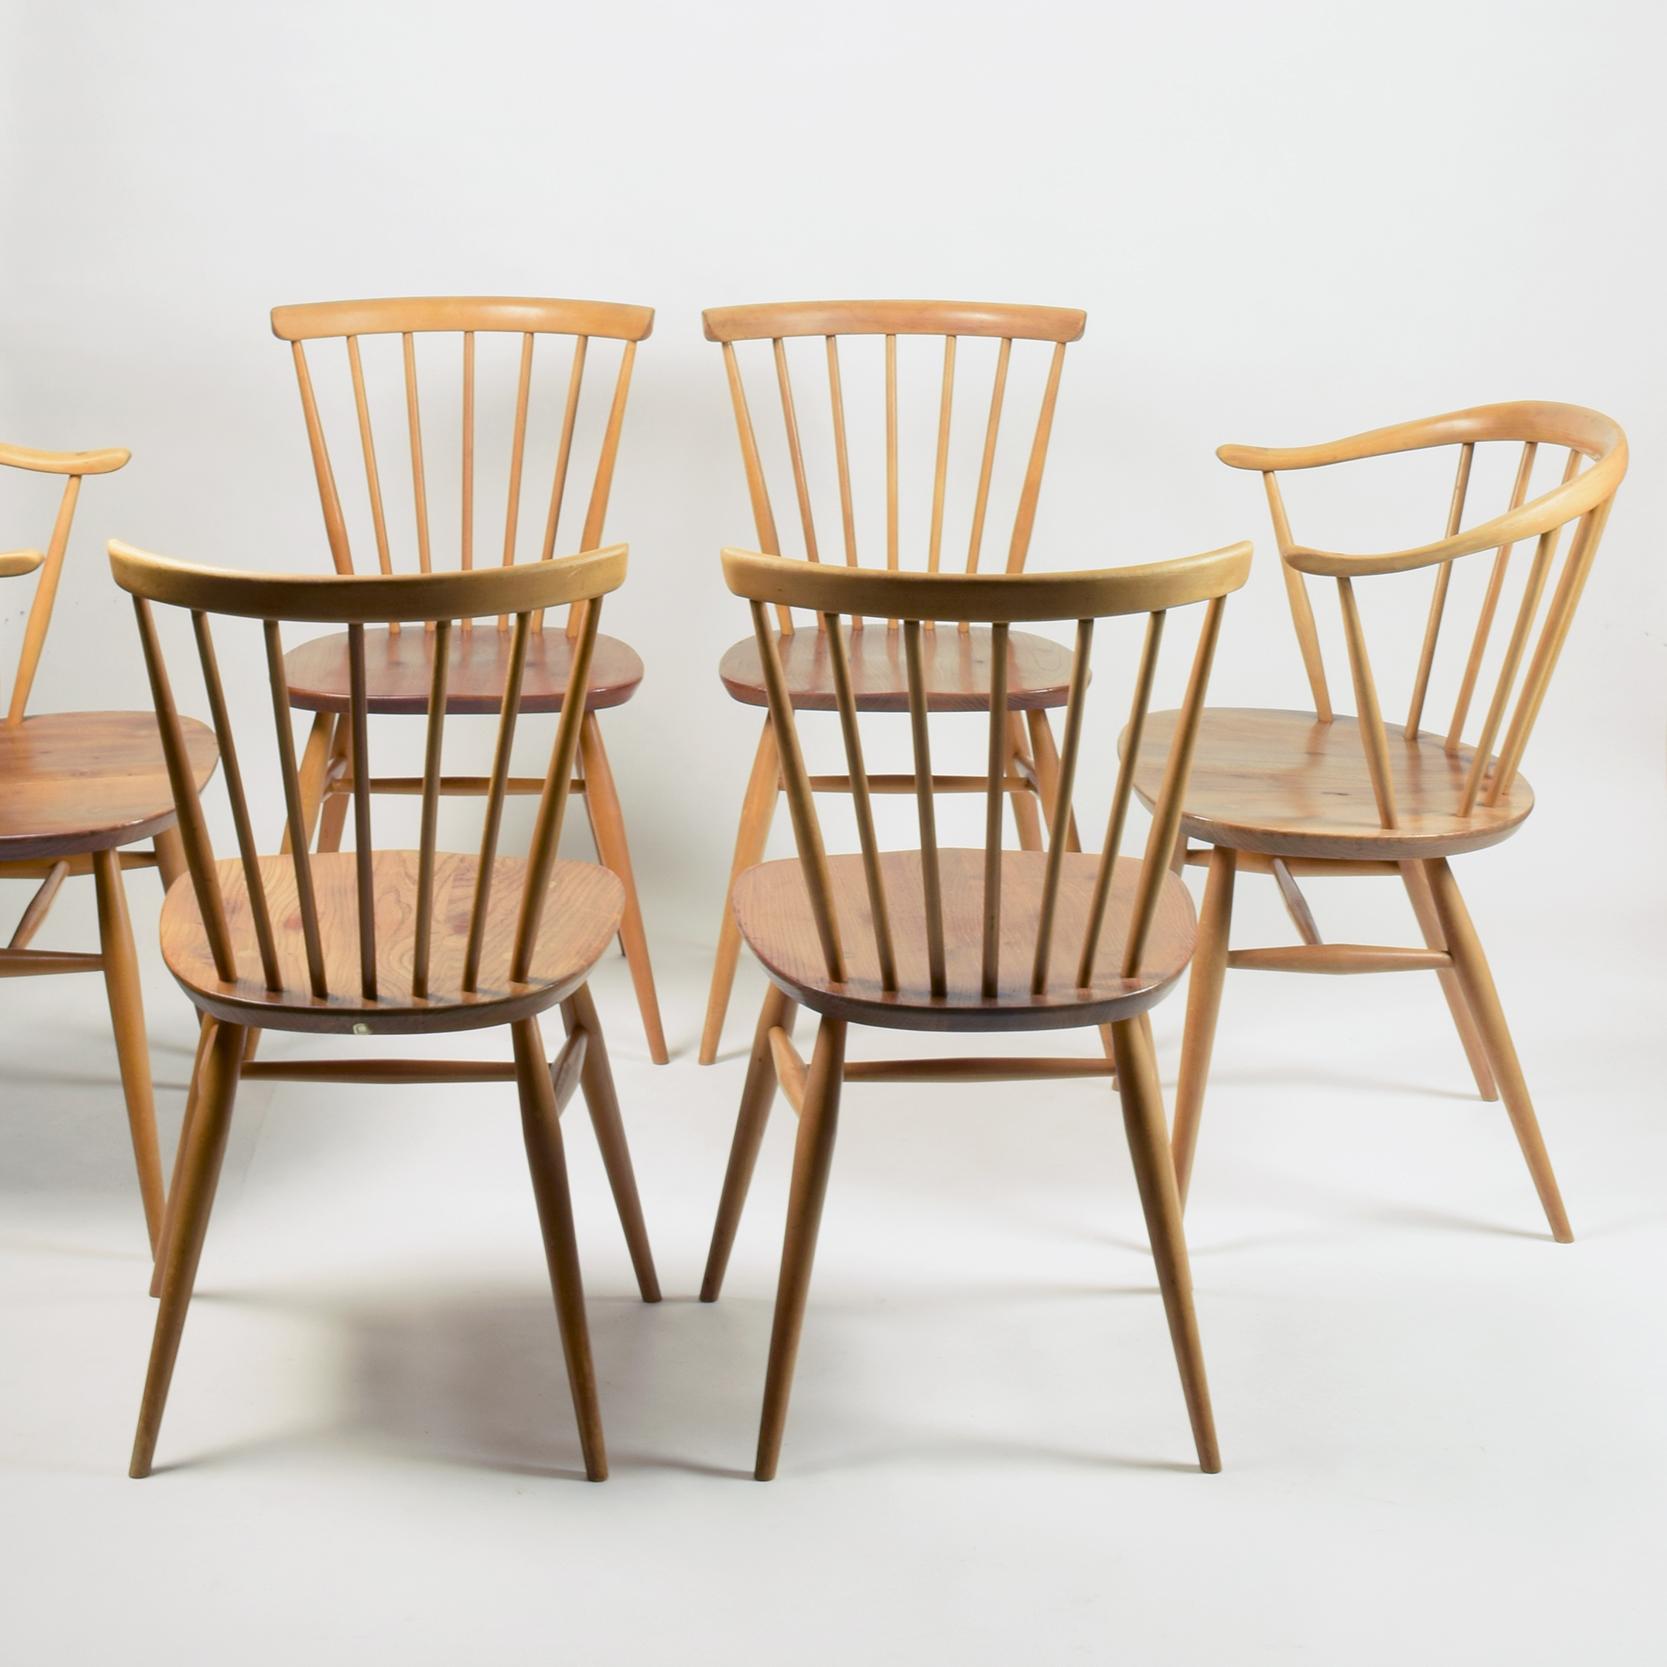 Lucian Ercolani for Ercol Furniture Ltd
'Windsor' Bow Top dining chairs, designed 1960s, these examples dating from circa 1970s.

Set of six, comprising:
Four model 449 side chairs
Two model 449A 'Cowhorn' armchairs

Solid elm and